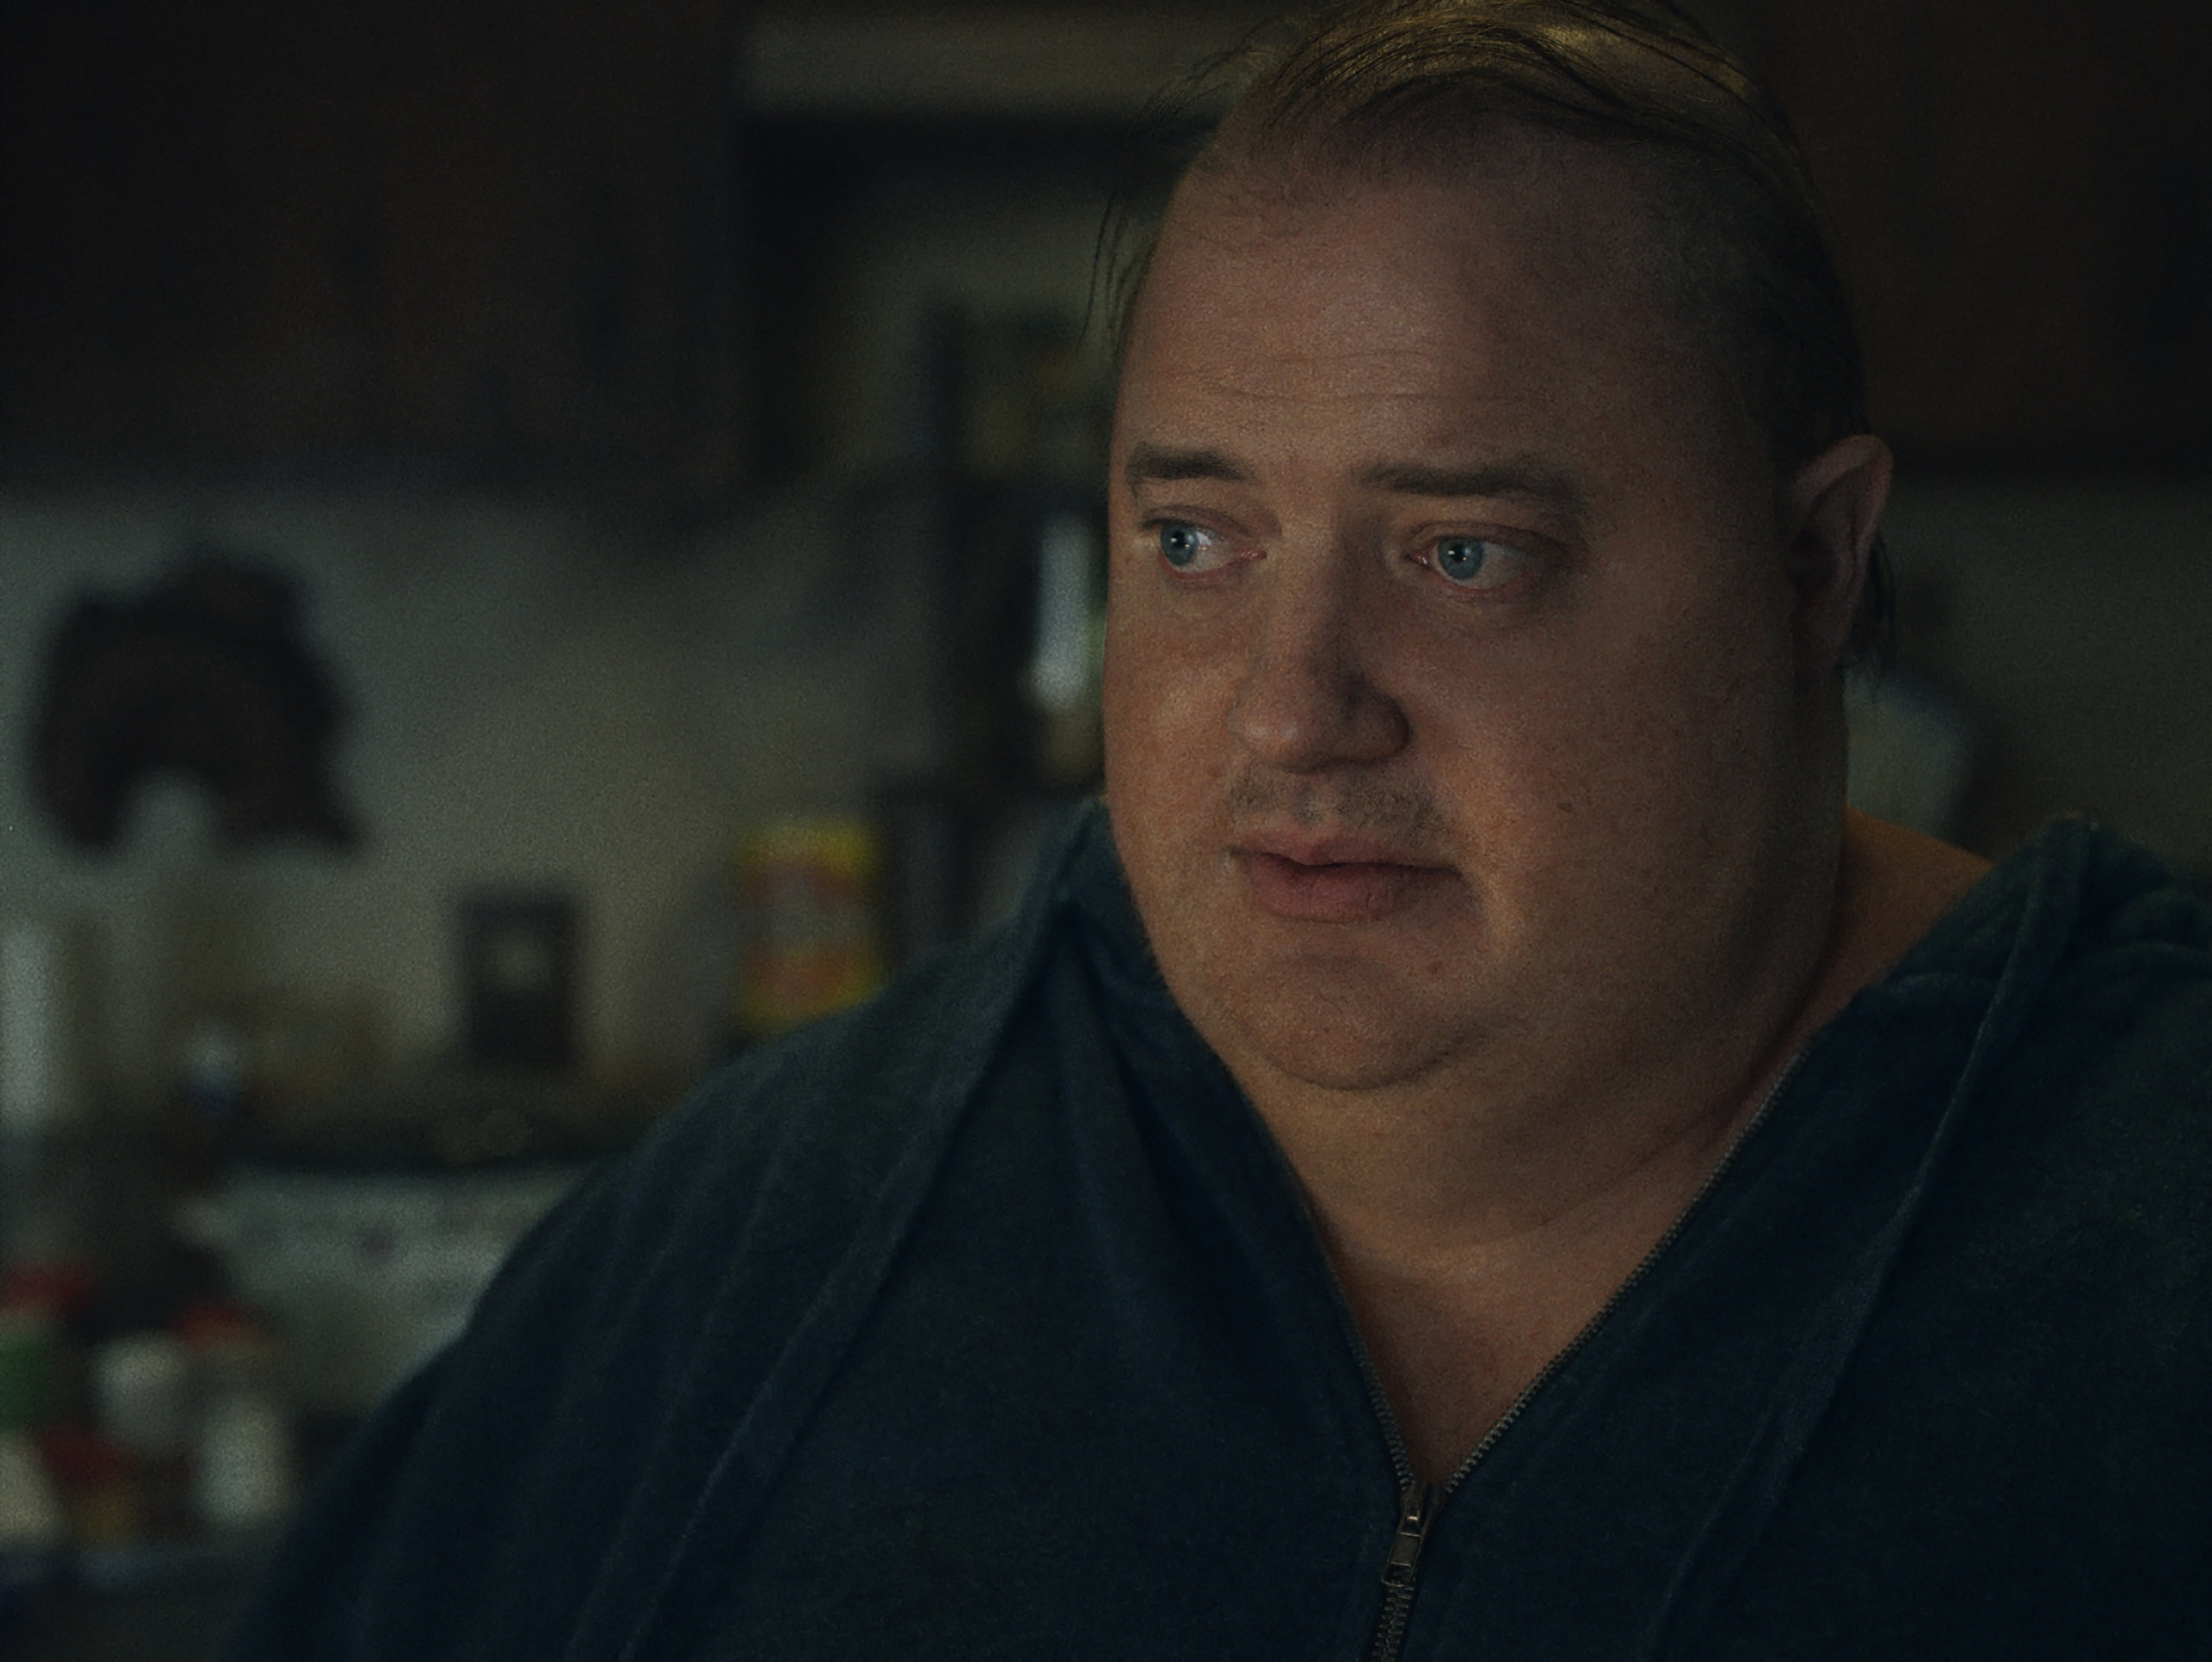 Brendan Fraser wore a 600-pound fat suit for "The Whale" playing at HIFF 2022, Hamptons International Film Festival